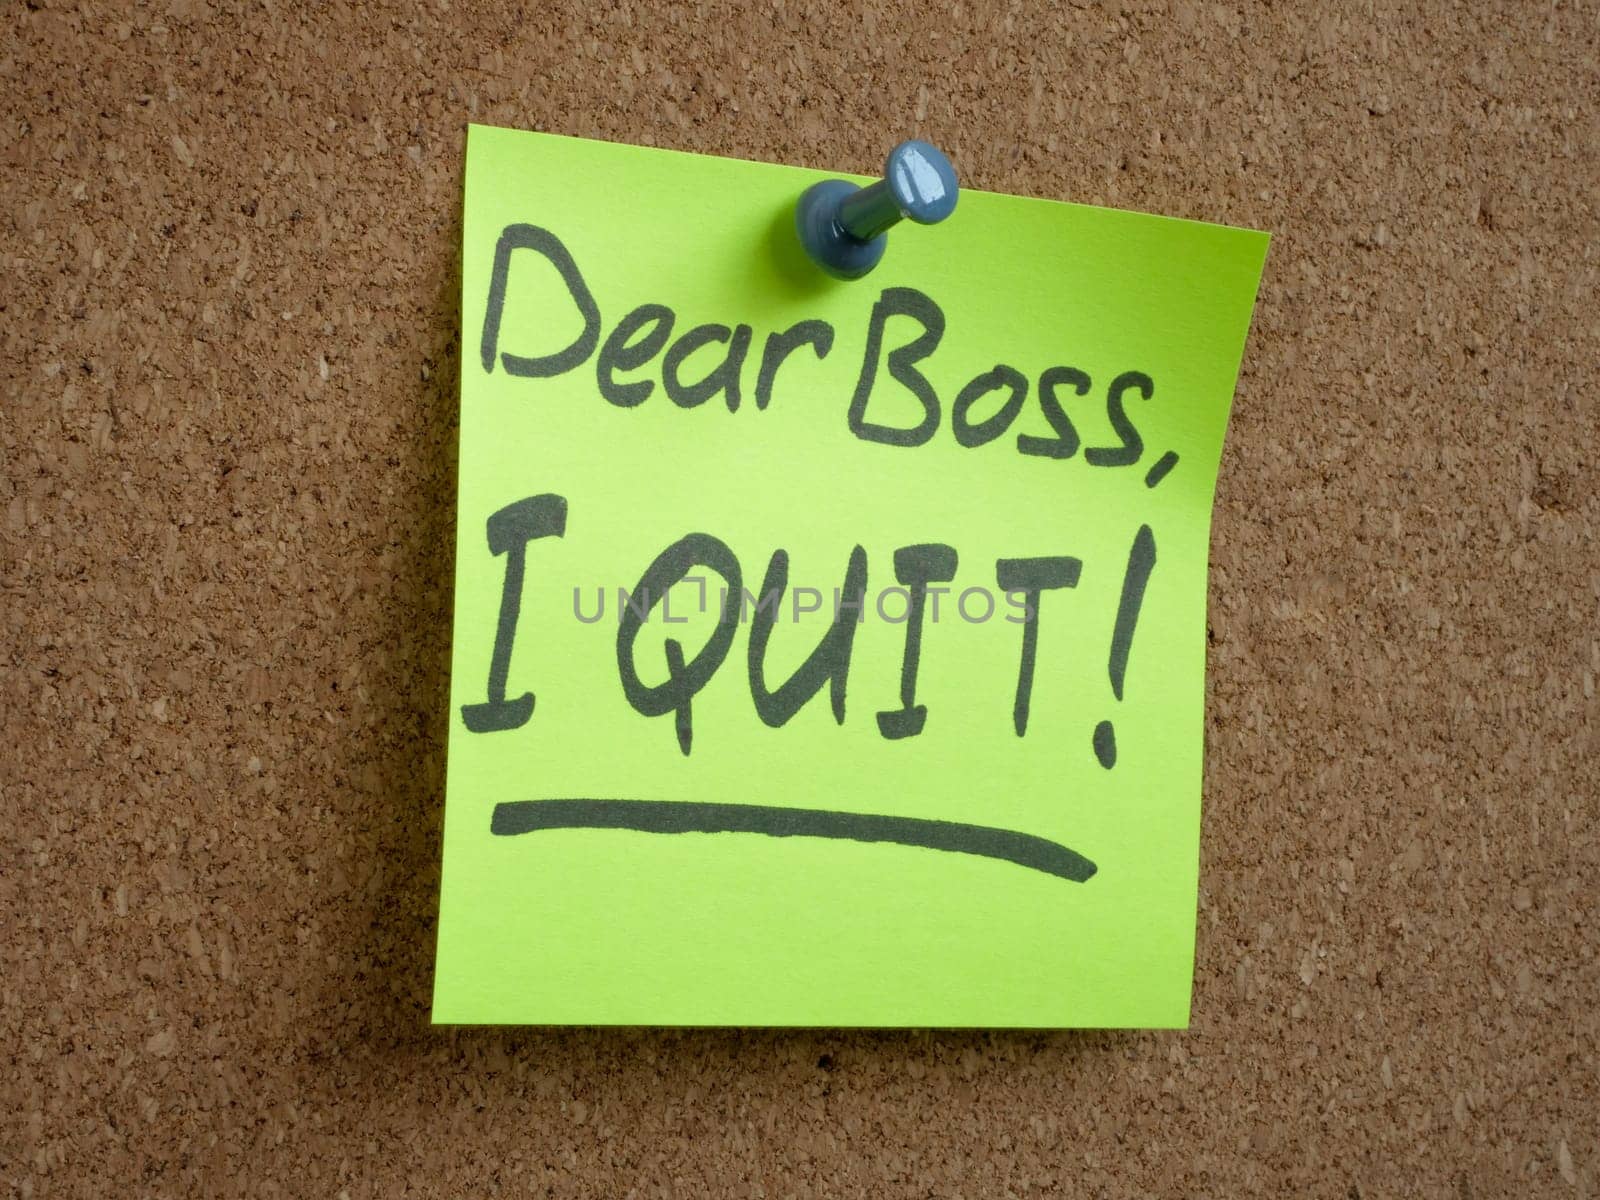 Pinned sticker with the inscription Dear boss, I quit. Employee quits concept. by designer491